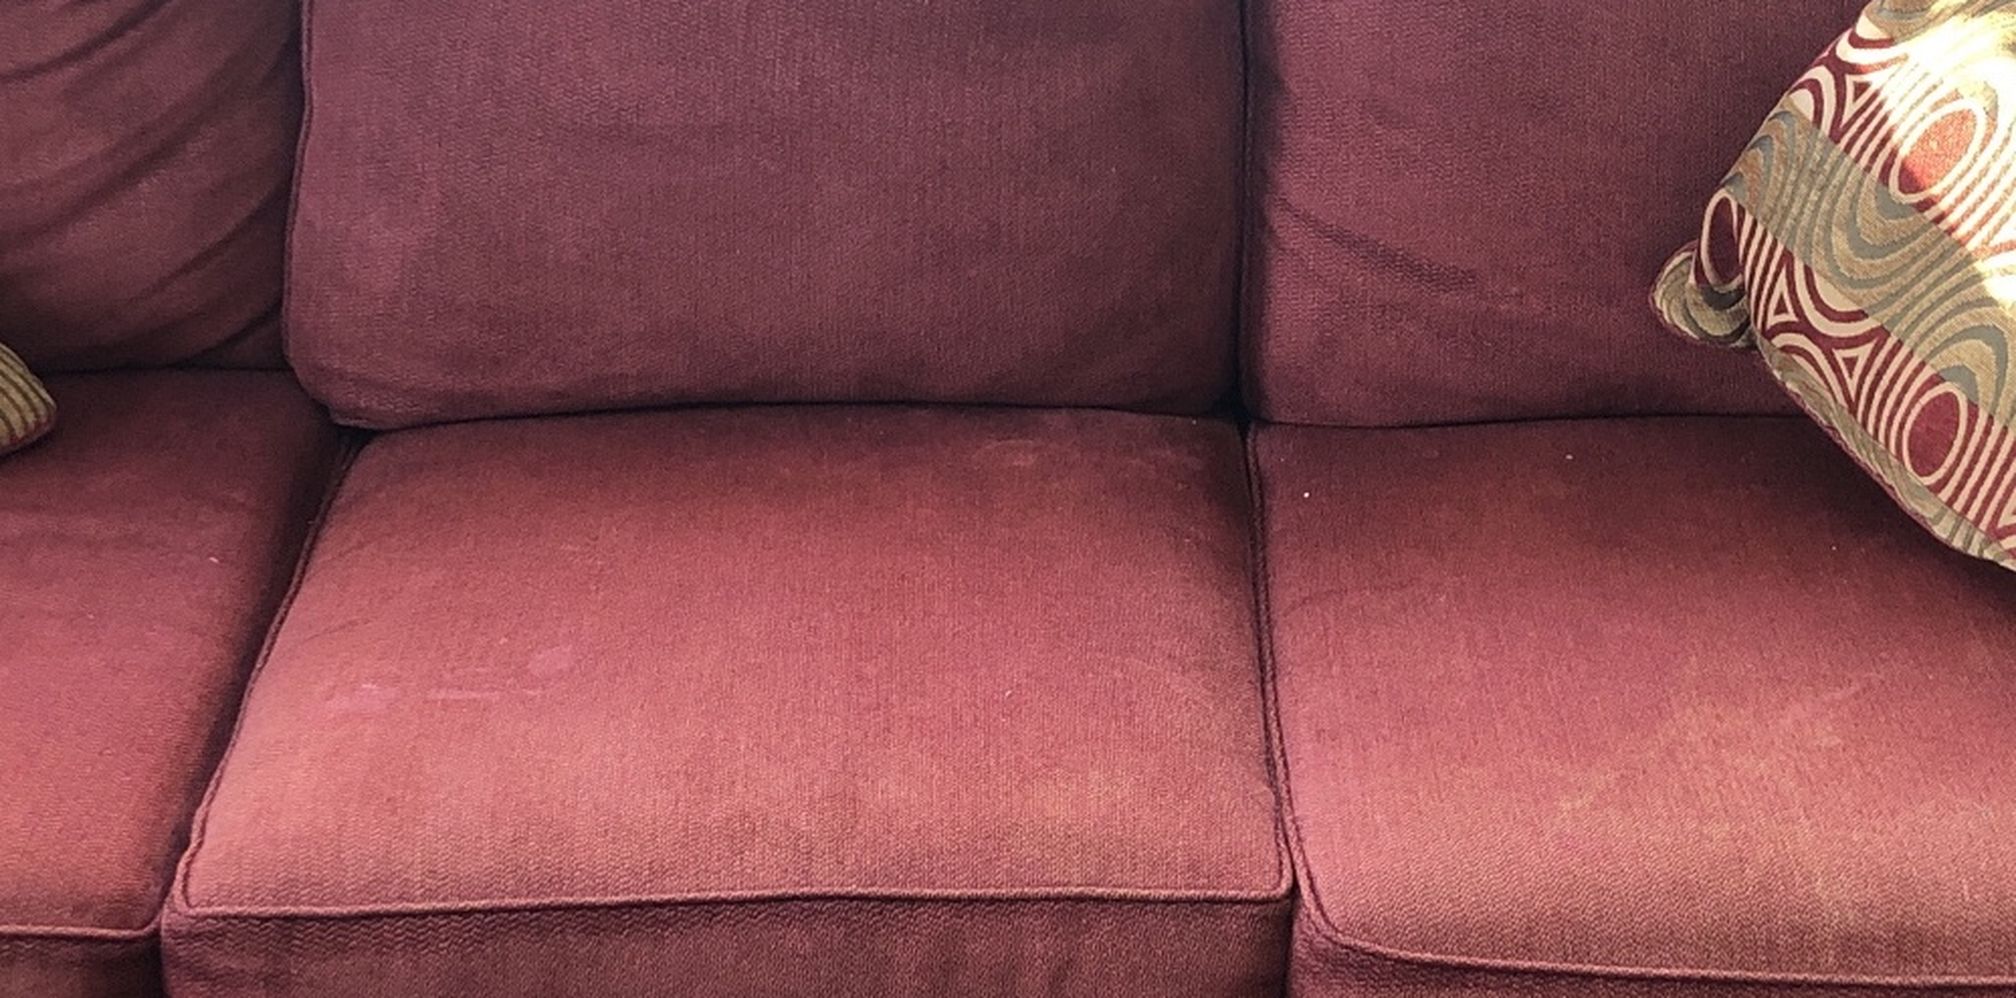 3 Seater Couch With Cushions Free